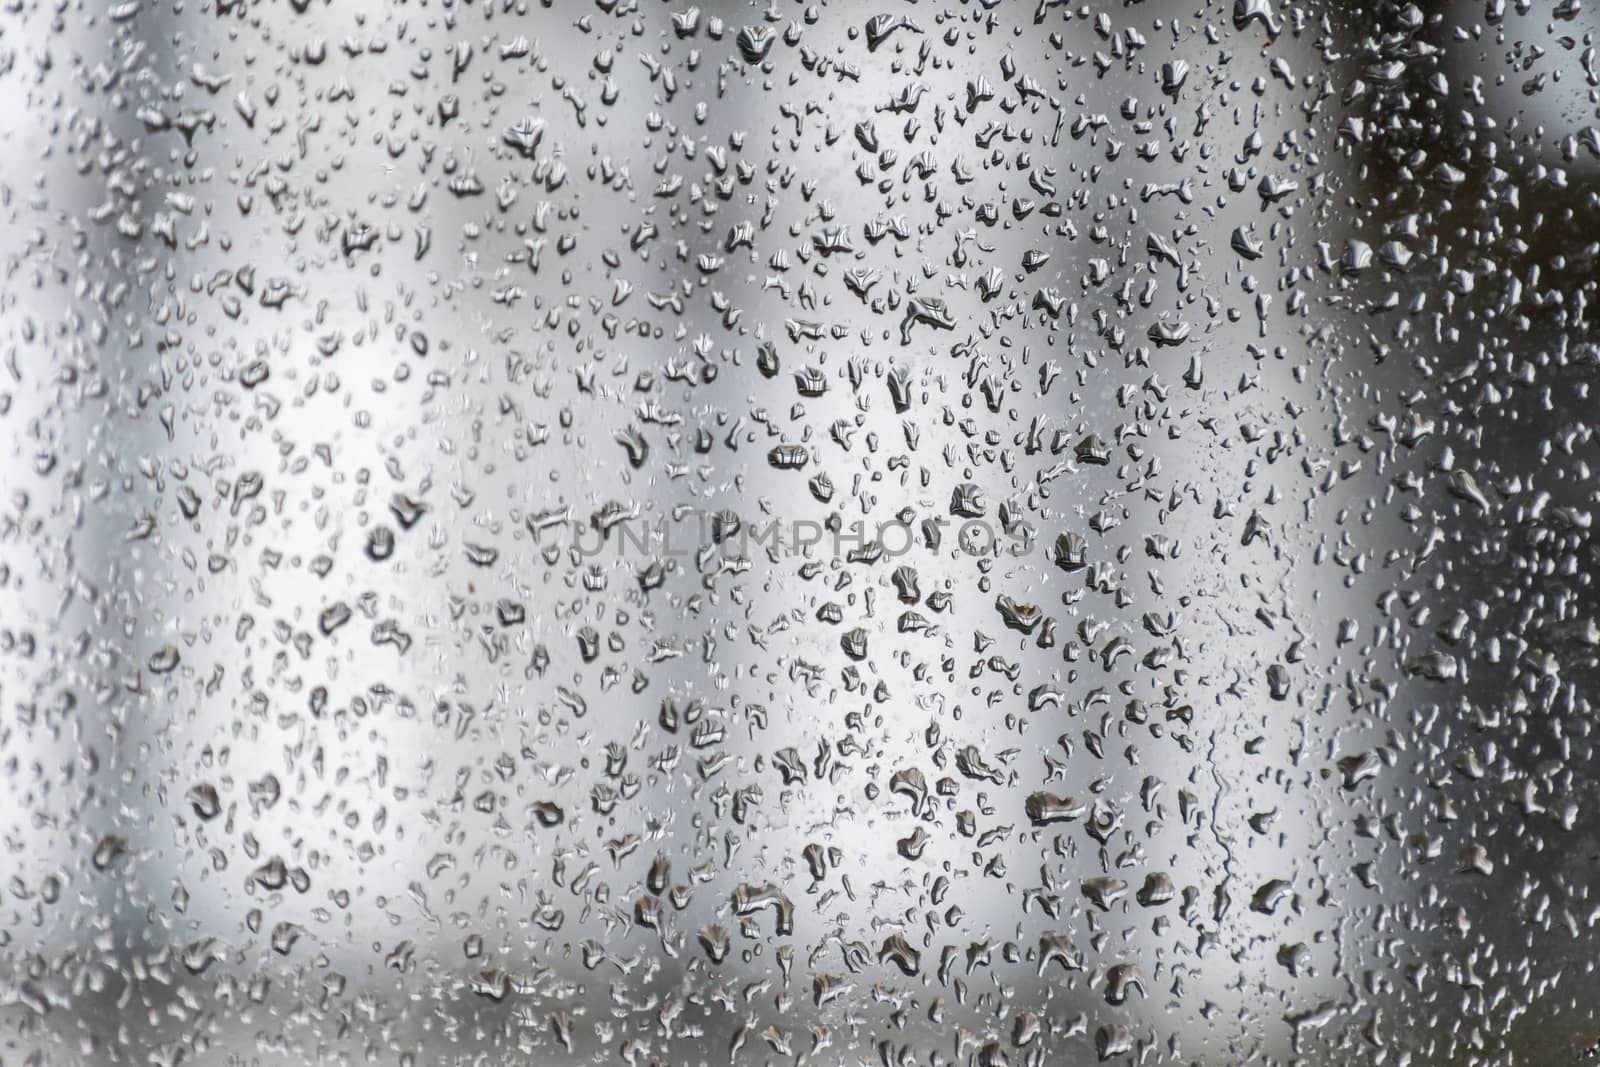 Water droplets on window during heavy monsoon rainfall by MXW_Stock